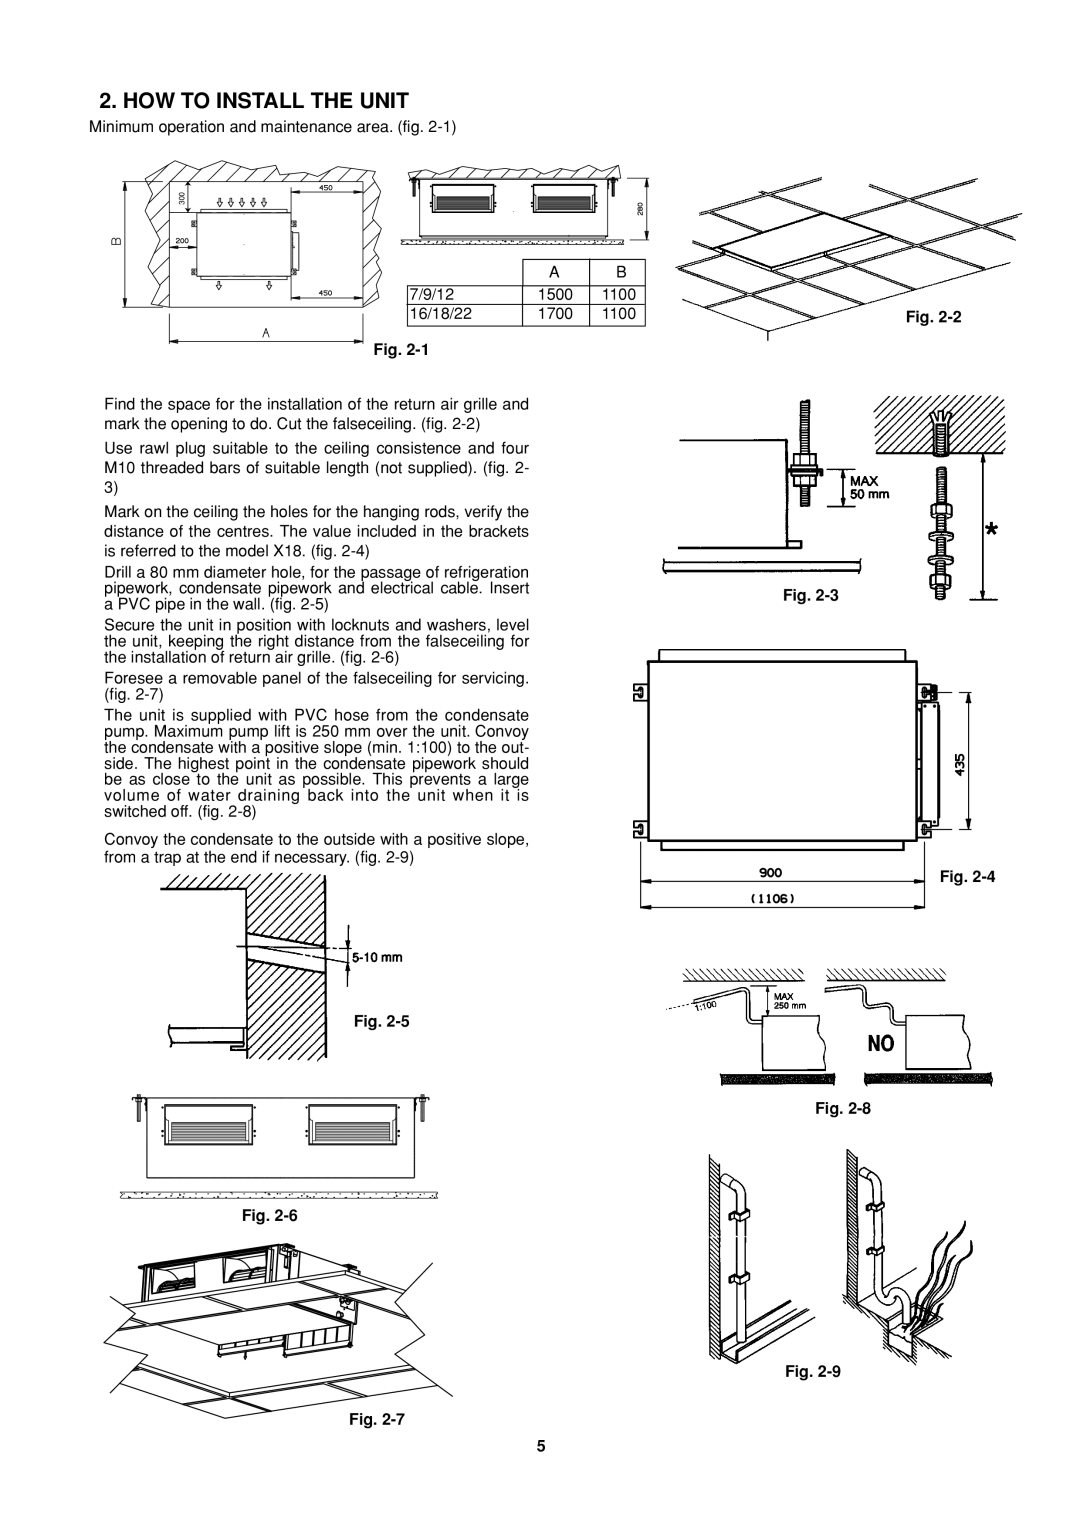 Sanyo R410A, SPW-UMR94EXH56, SPW-UMR124EXH56, SPW-UMR164EXH56 How To Install The Unit, Fig. Fig. Fig. Fig. Fig 